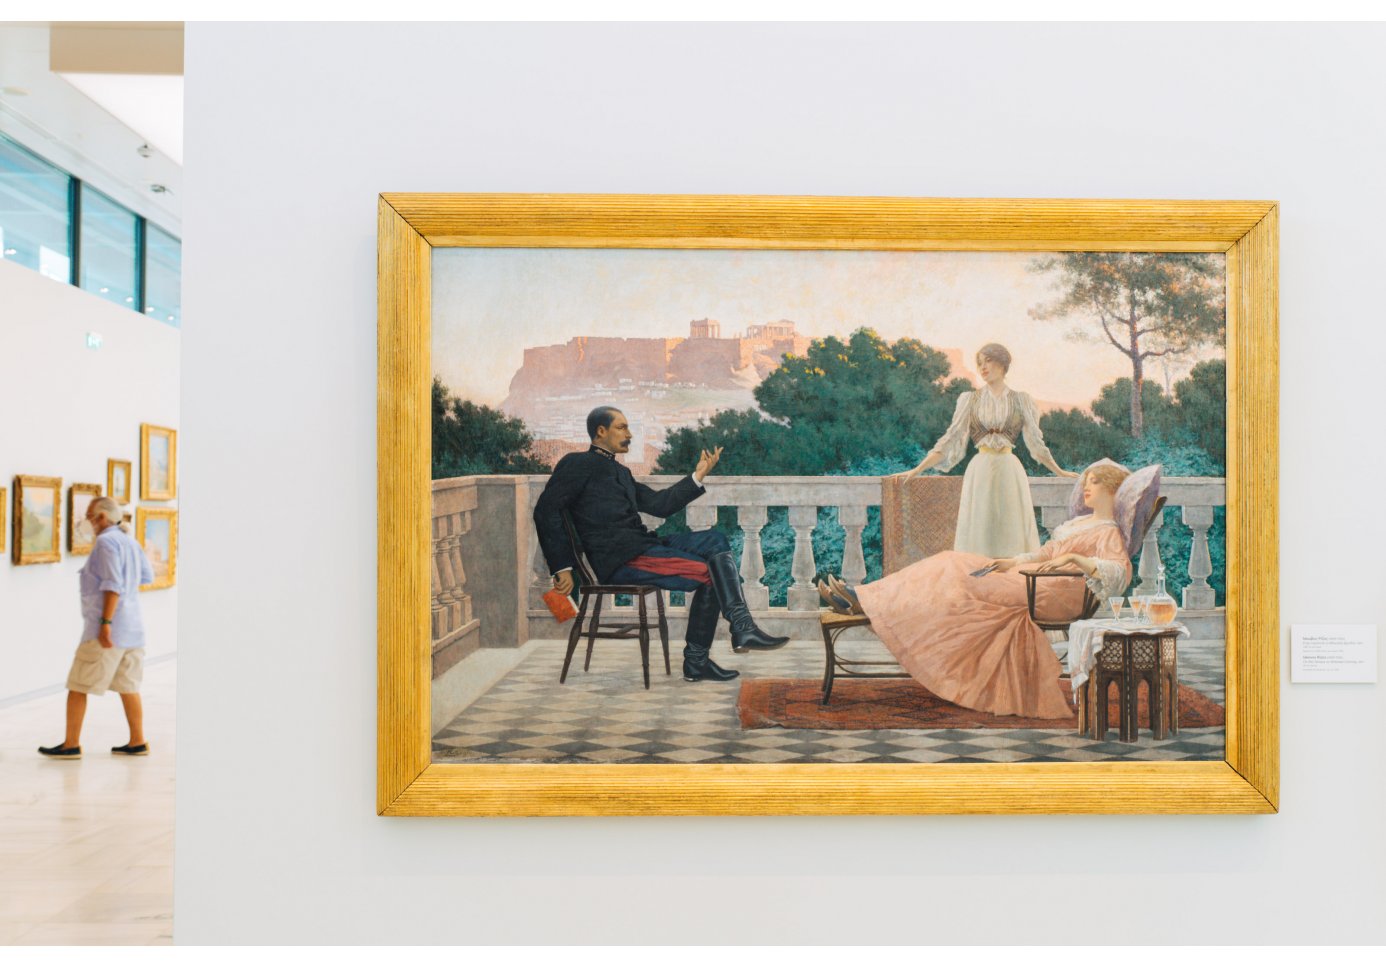 On the Terrace by Iakovos Rizos at the National Gallery of Greece in Athens